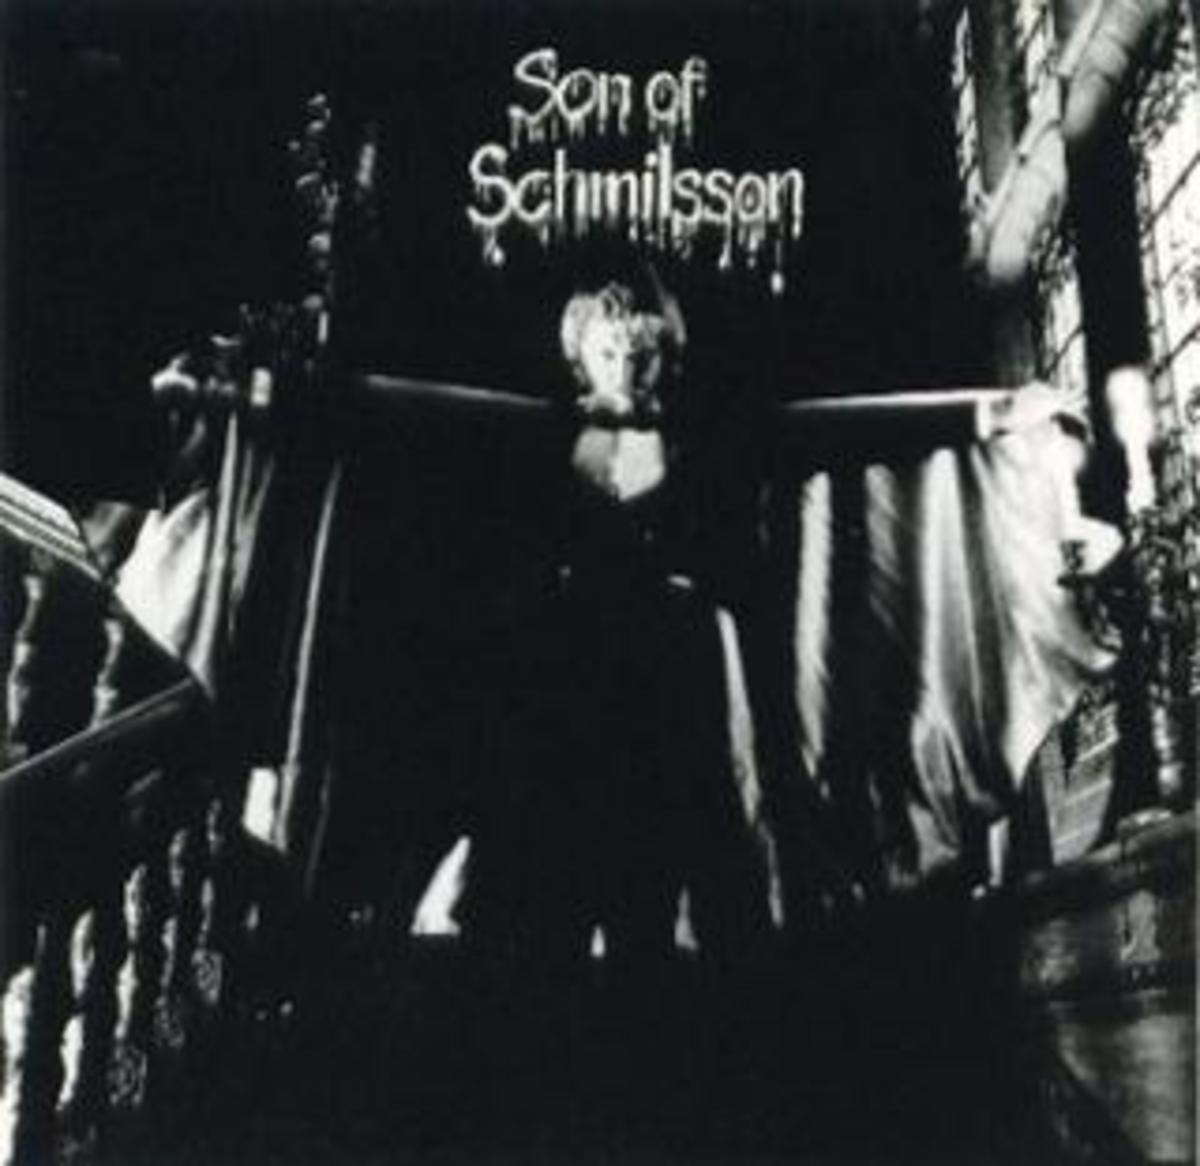 follow-up-to-nilsson-schmilsson-was-mistakenly-panned-by-critics-and-fans